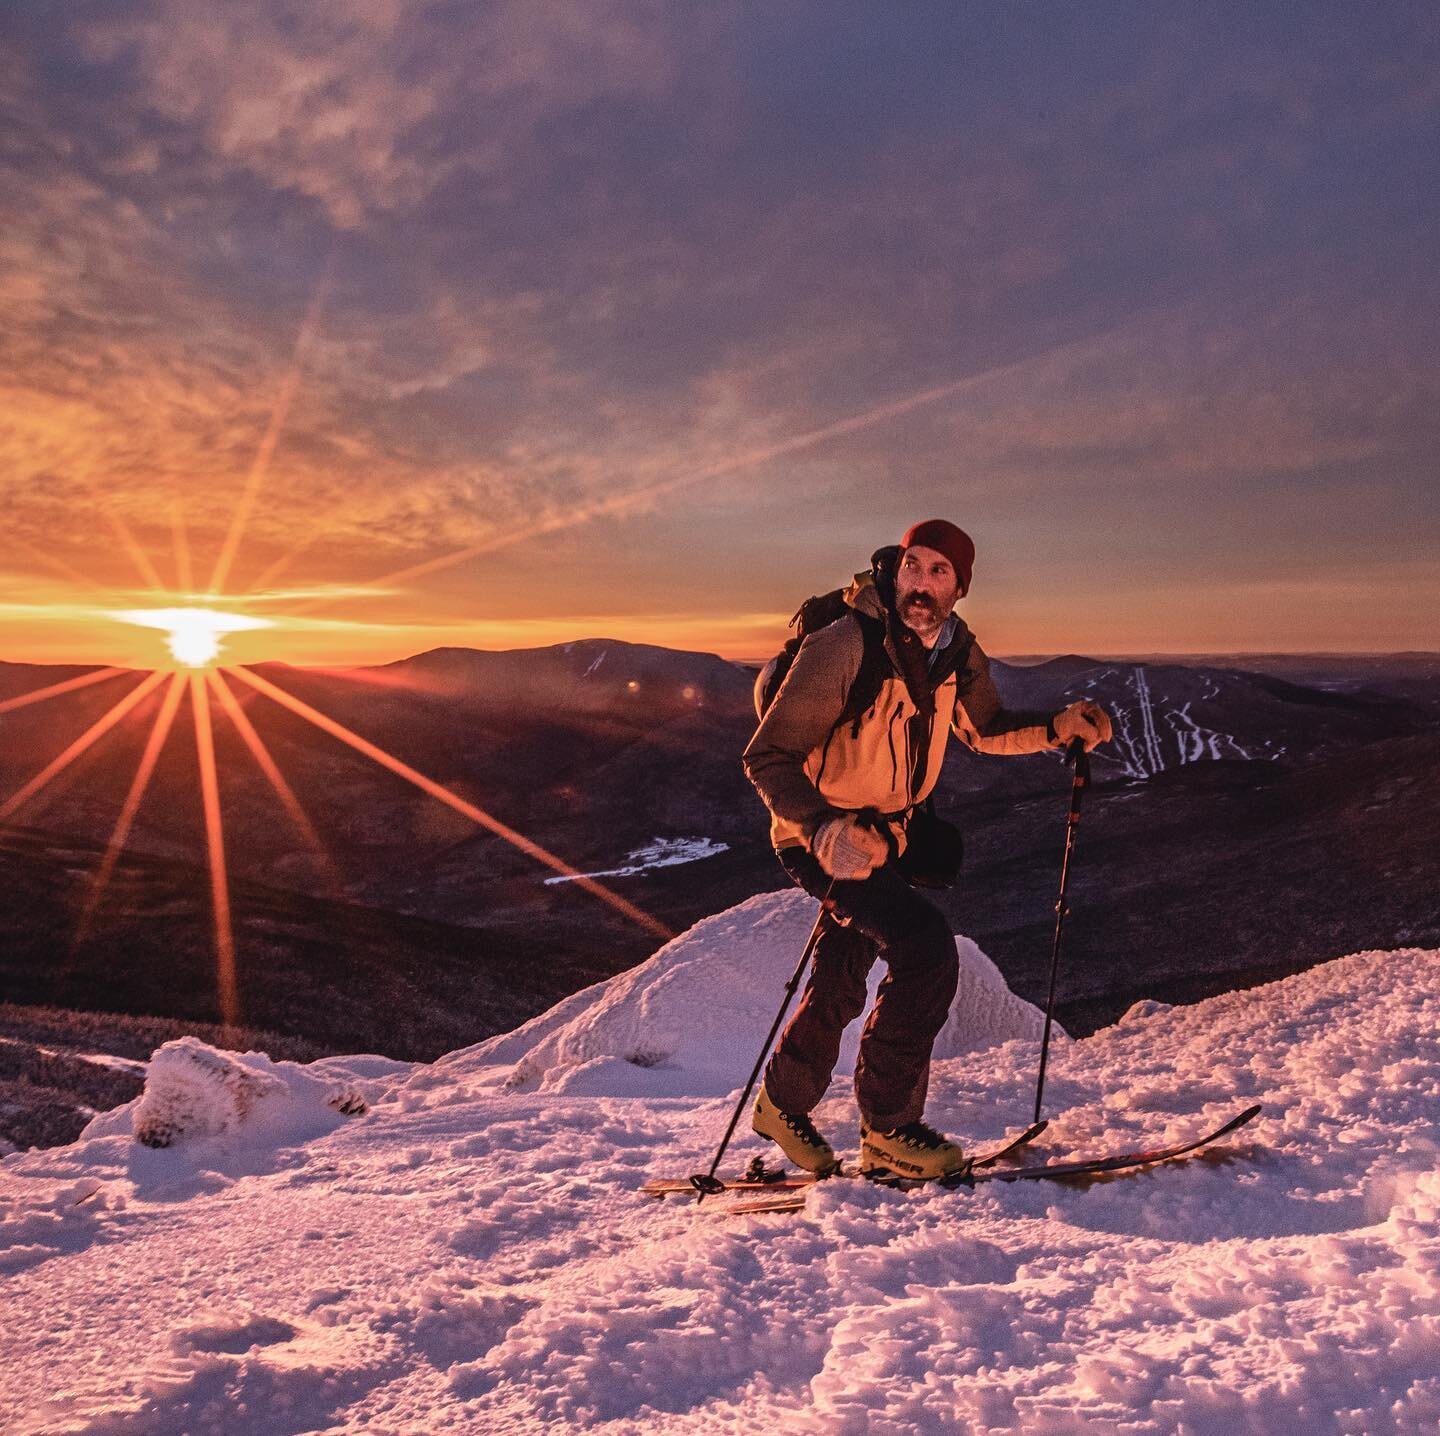 A new Adventures of Chris &amp; Chris episode is live on YouTube! Link to the film in my profile. @chrismshane and I camped above tree line in the northern Presidentials. @sr_drummond met us that morning for an epic sunrise. As always, thank you so m